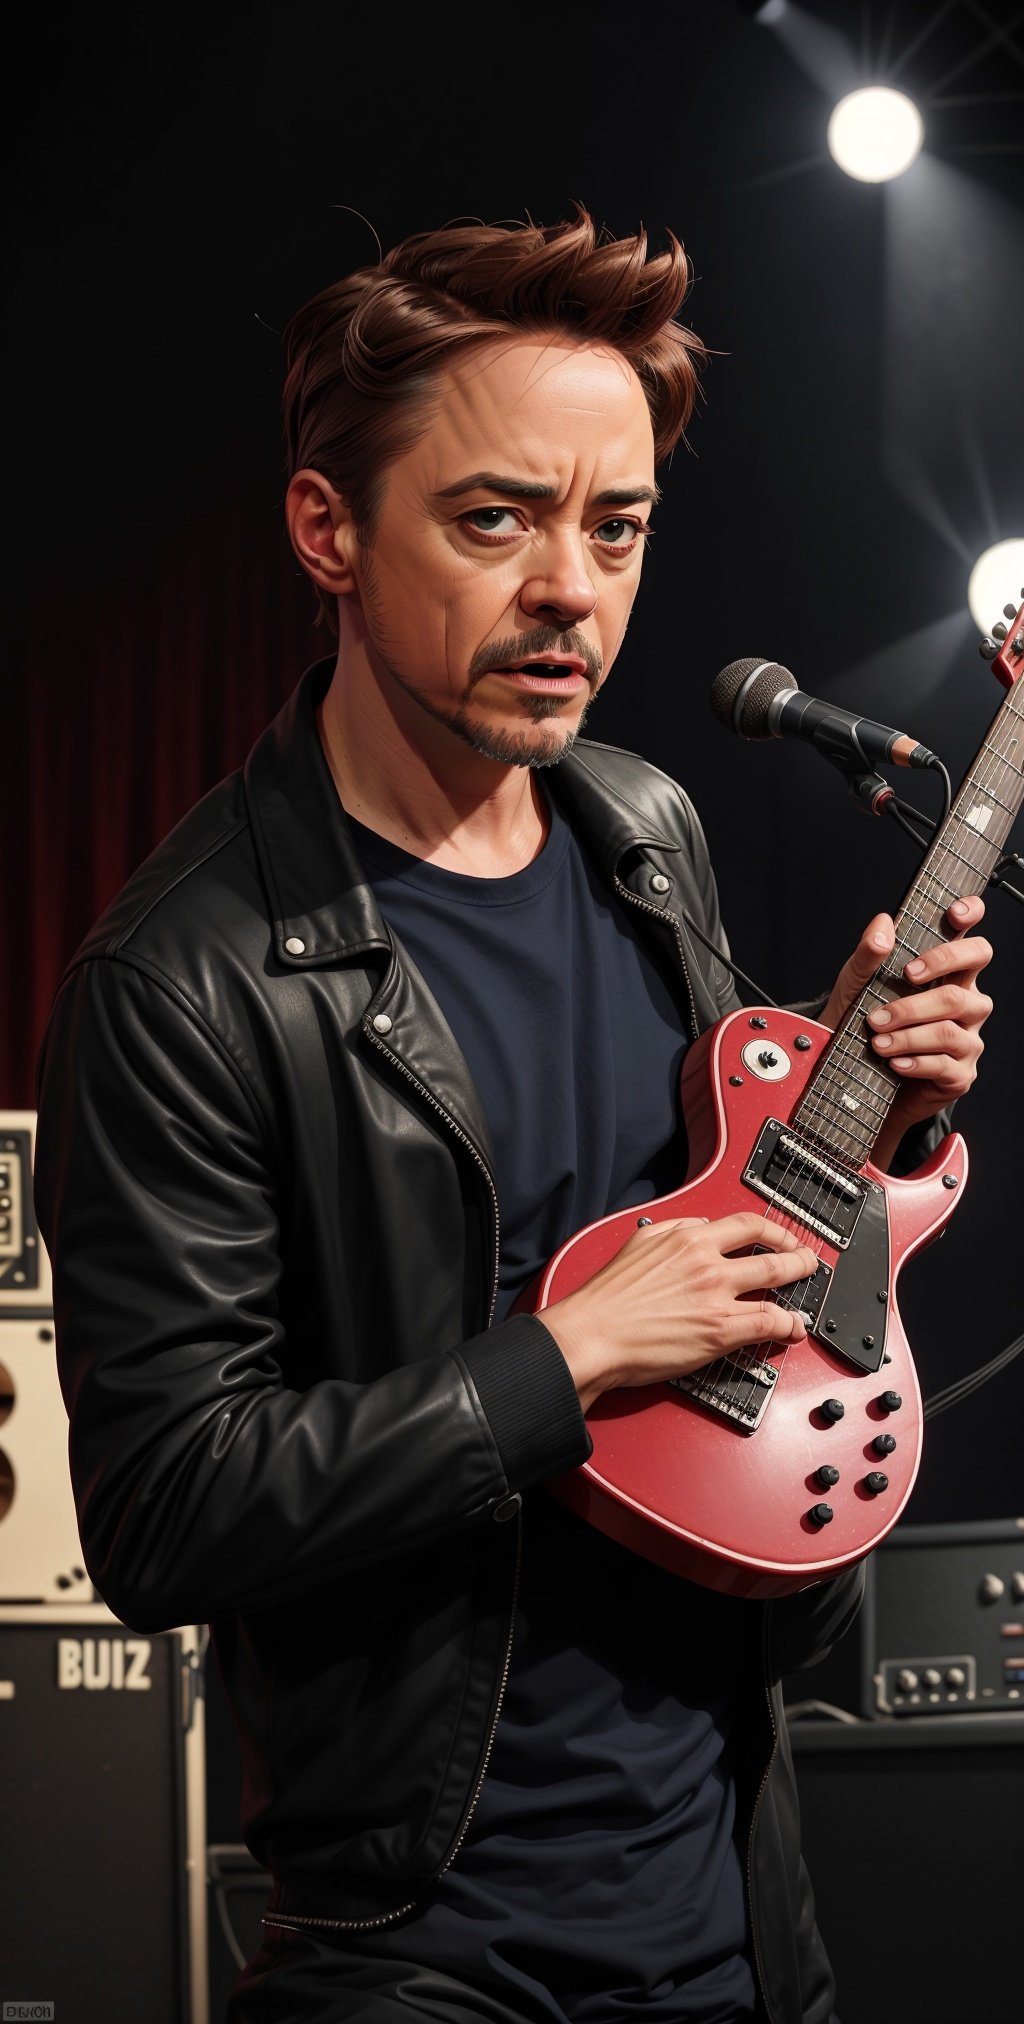 A music promo, (close-up) angry Robert Downey Jr. holding metal guitare, rough, dark stage in the background